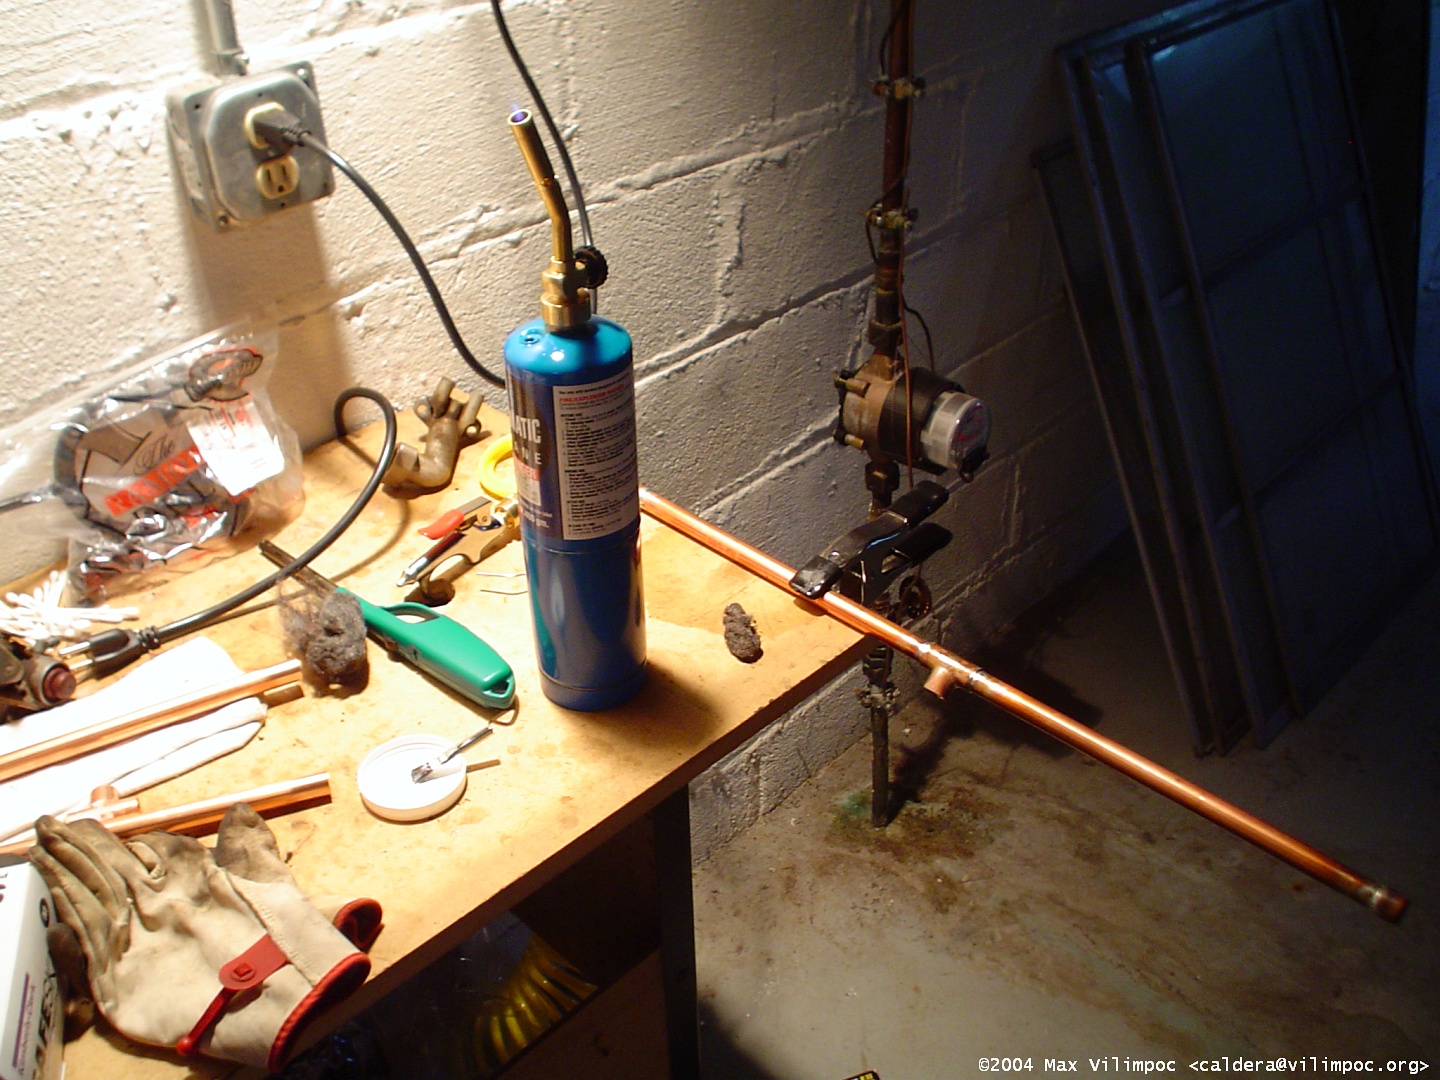 Soldering the copper pipe using the propane torch, a view of the workbench in the basement